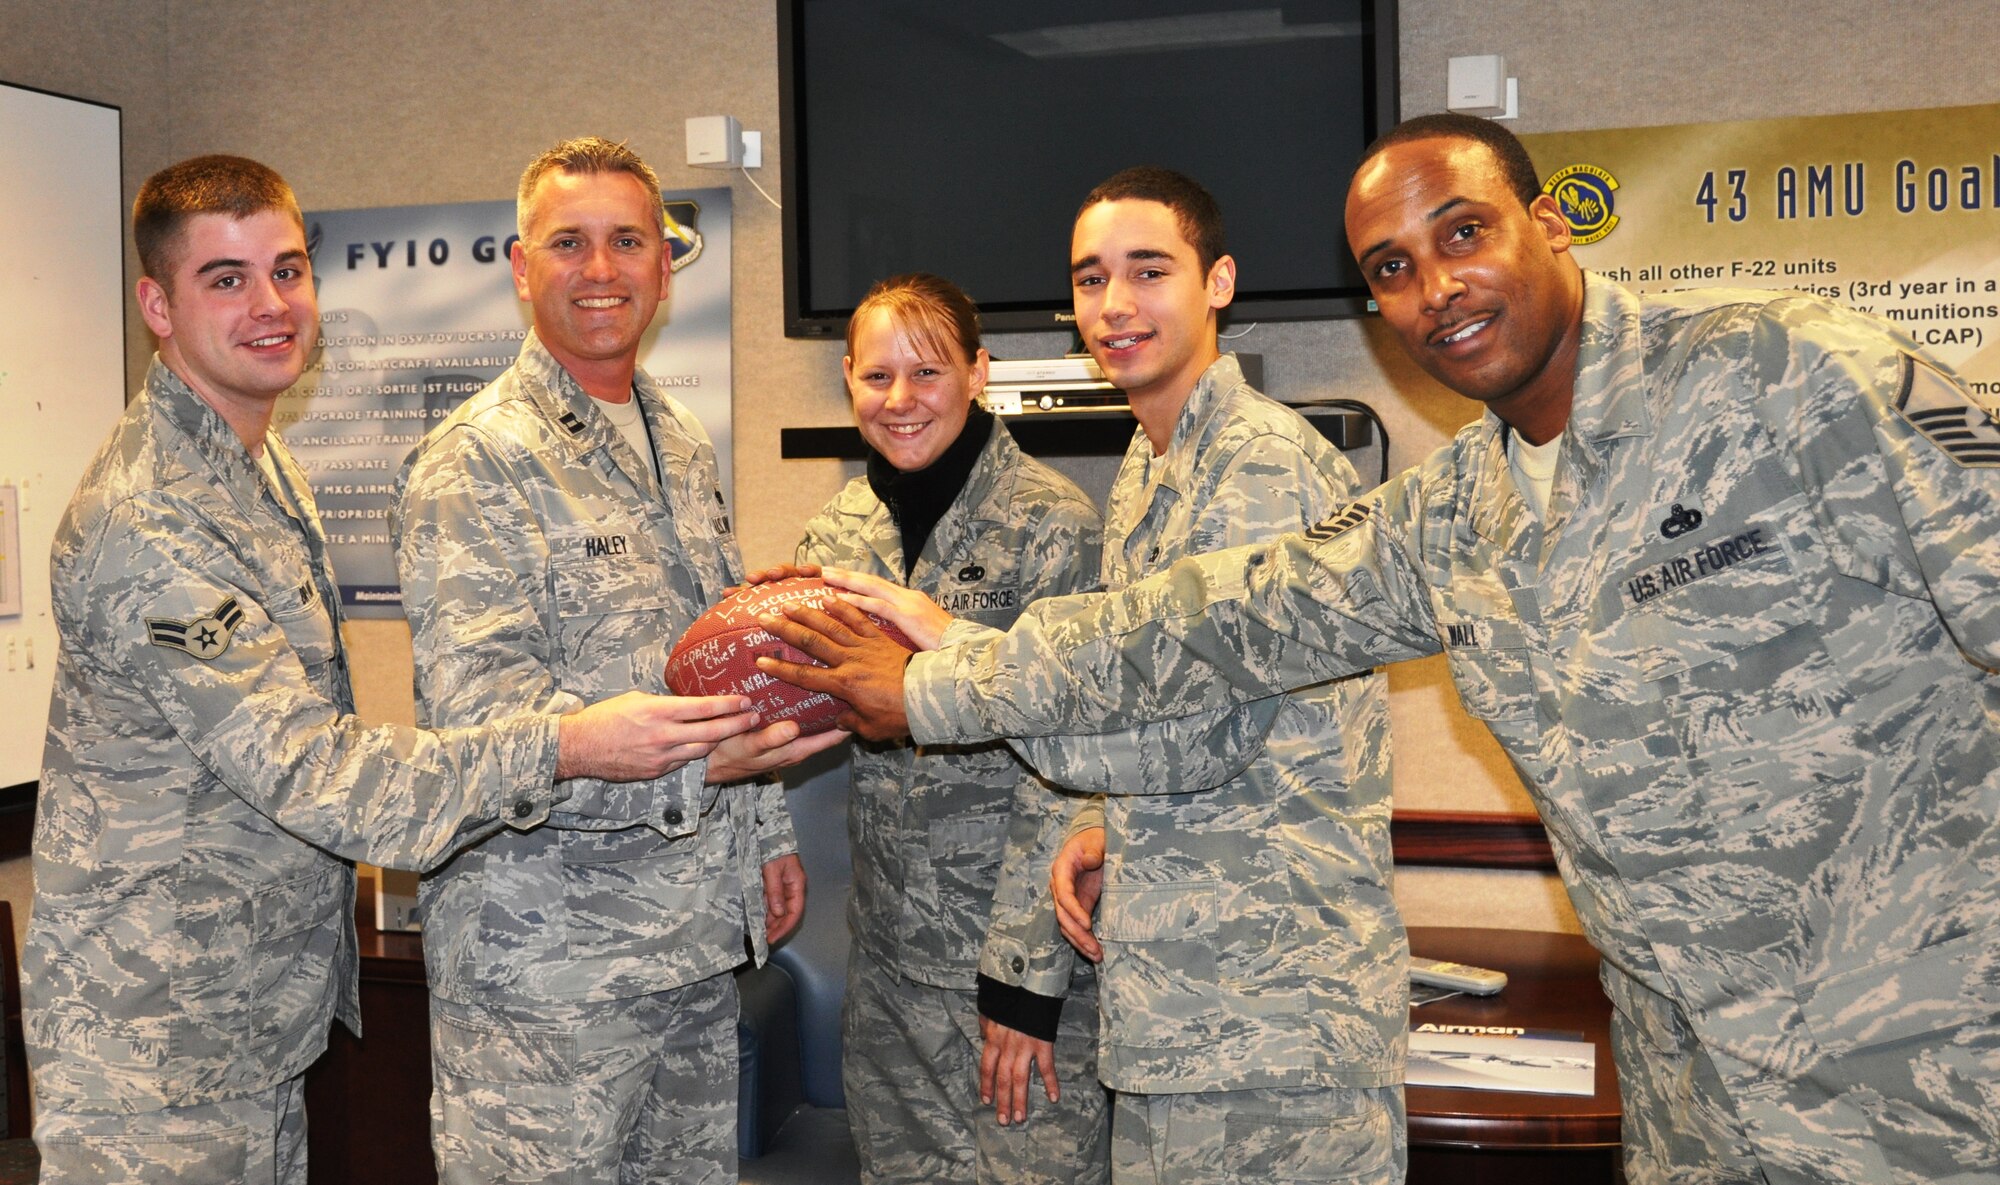 Capt. Chris Haley, 43rd AMU Officer in Charge, and Master Sgt. Stanley Wall, 43rd AMU crew chief, acted as the general manager and the head coach while recognizing three AMU personnel with 'LCAP Top Performer' game balls.  Of the 290 personnel in the AMU, 10 were recognized with the balls.  (U.S. Air Force photo/Senior Airman Veronica McMahon)